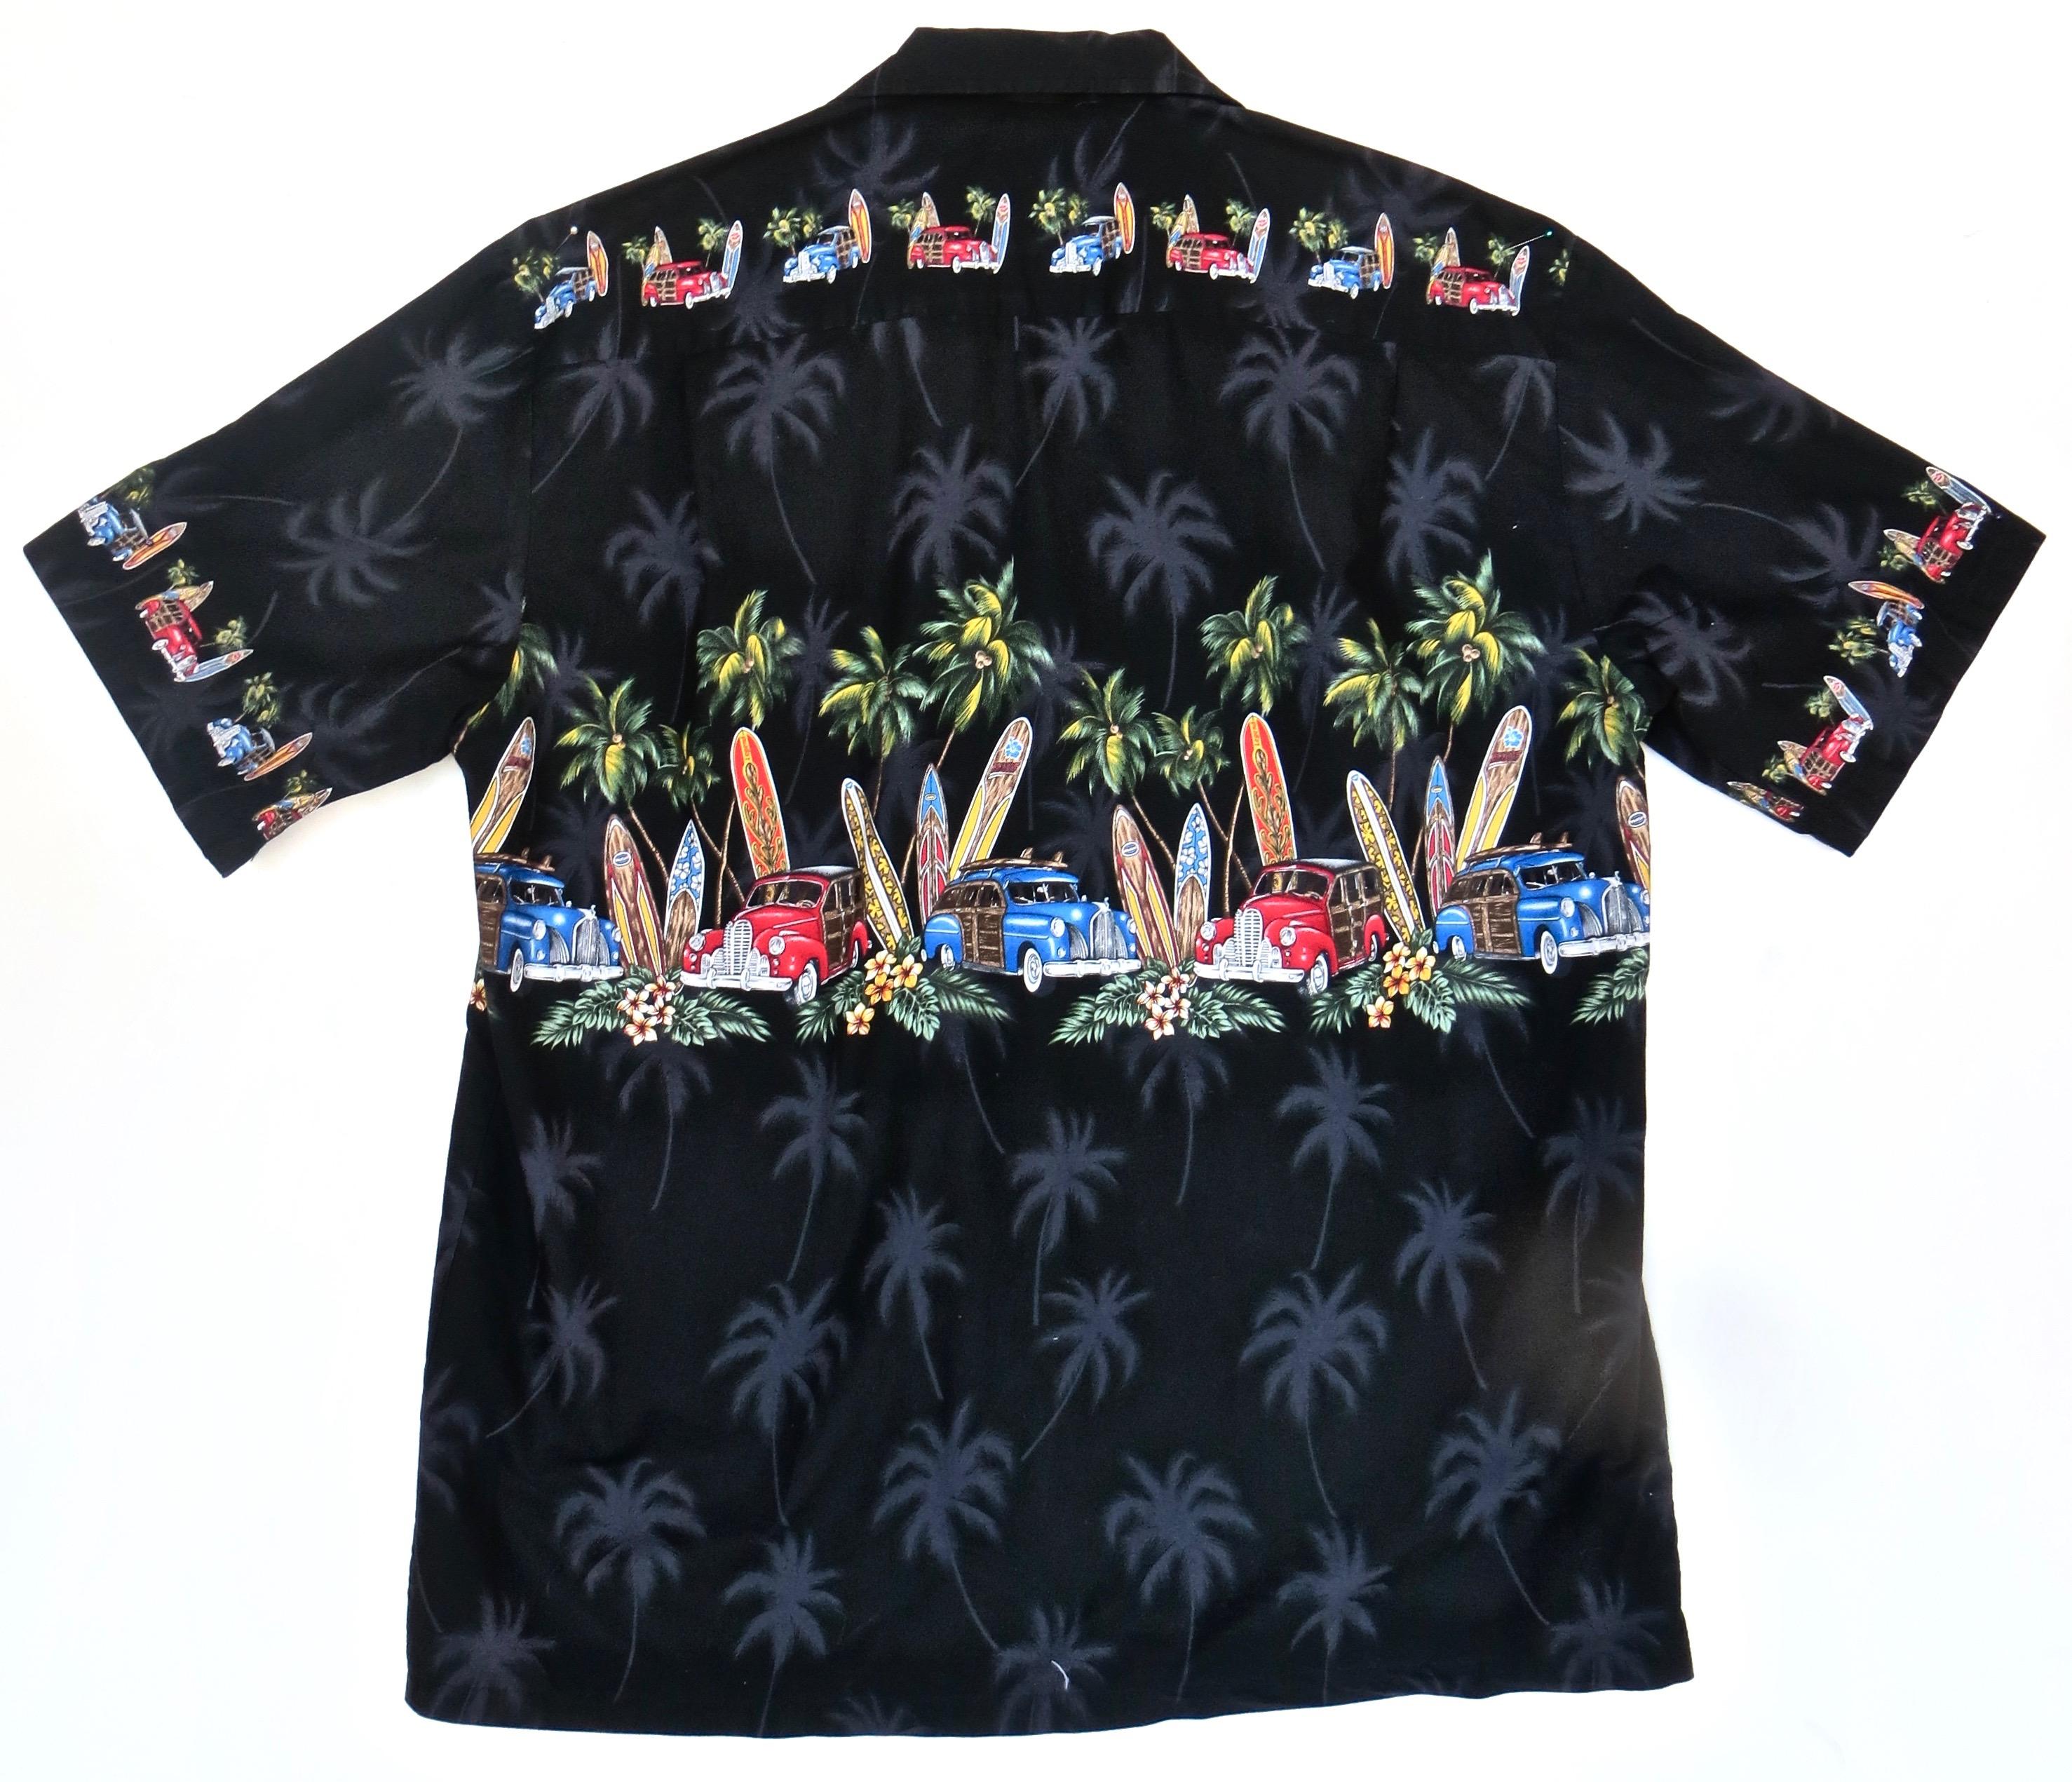 Cotton Hawaiian vintage shirt with surfboards and woodies motif, reminiscent of Hawaiian Island recreation; includes brightly colored images of mid -20th century wooden sided station wagons (woodies) along with a preponderance of oversized different